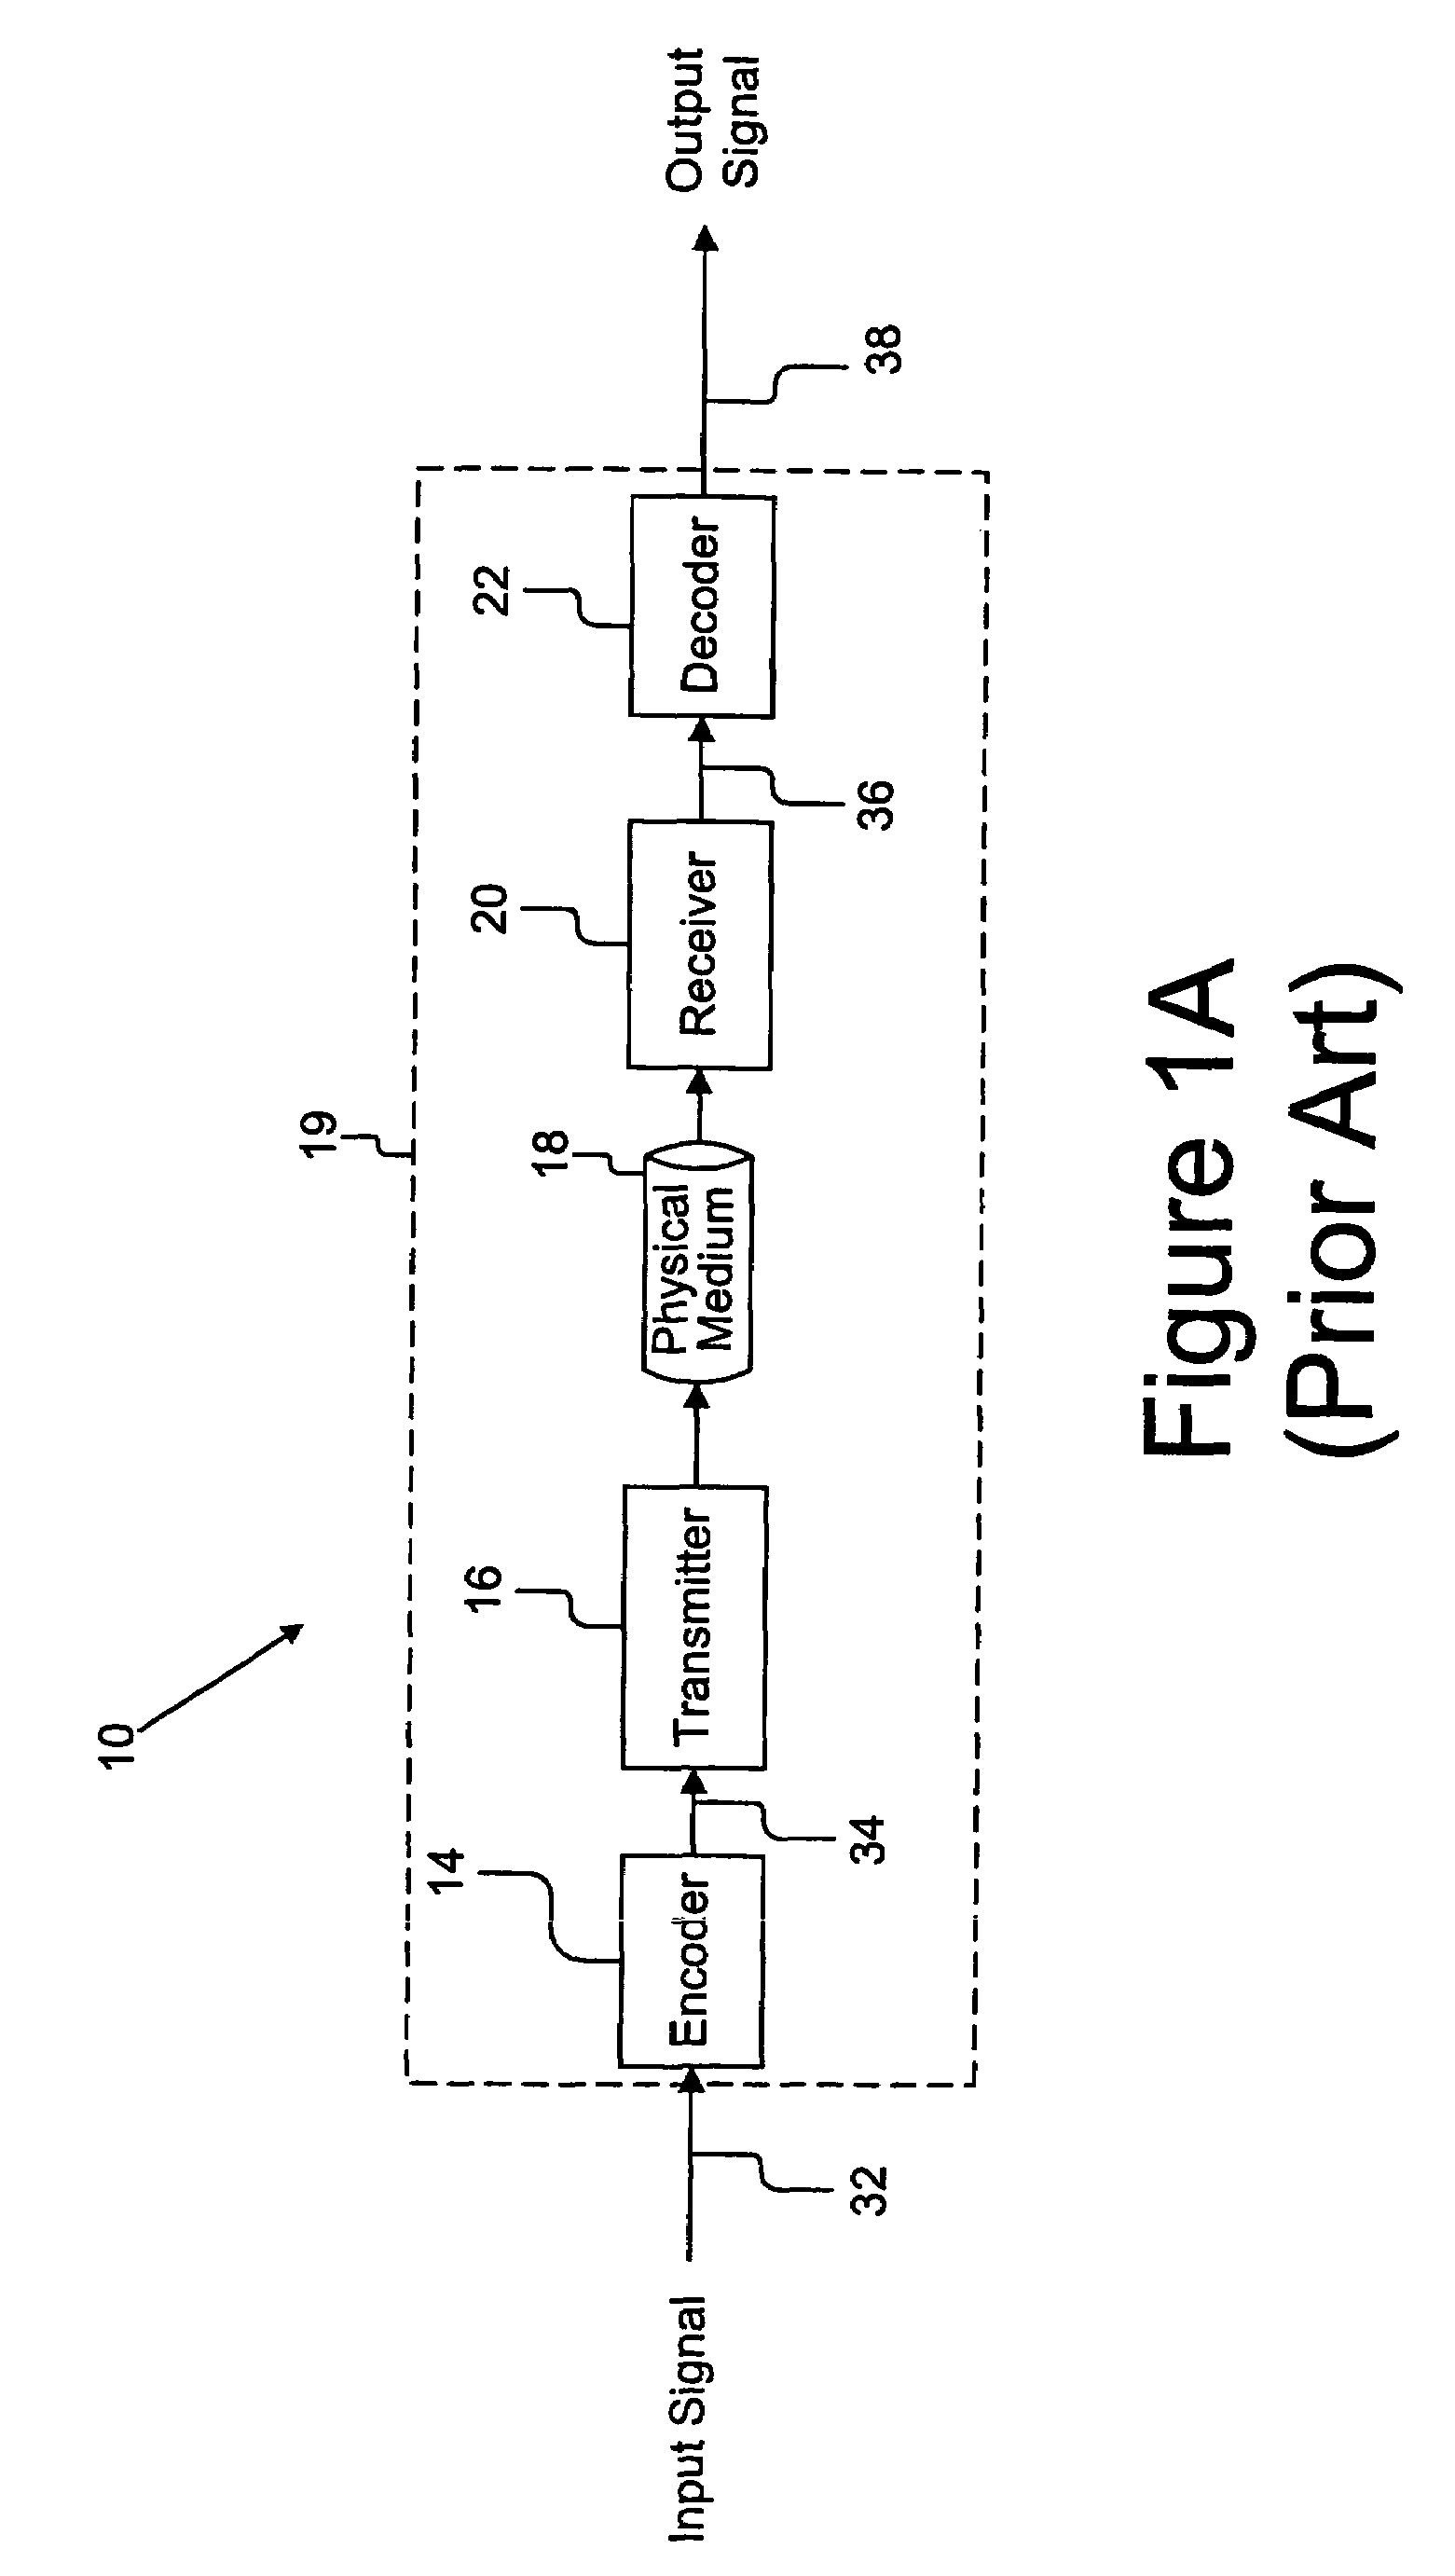 System and method for transporting a compressed video and data bit stream over a communication channel